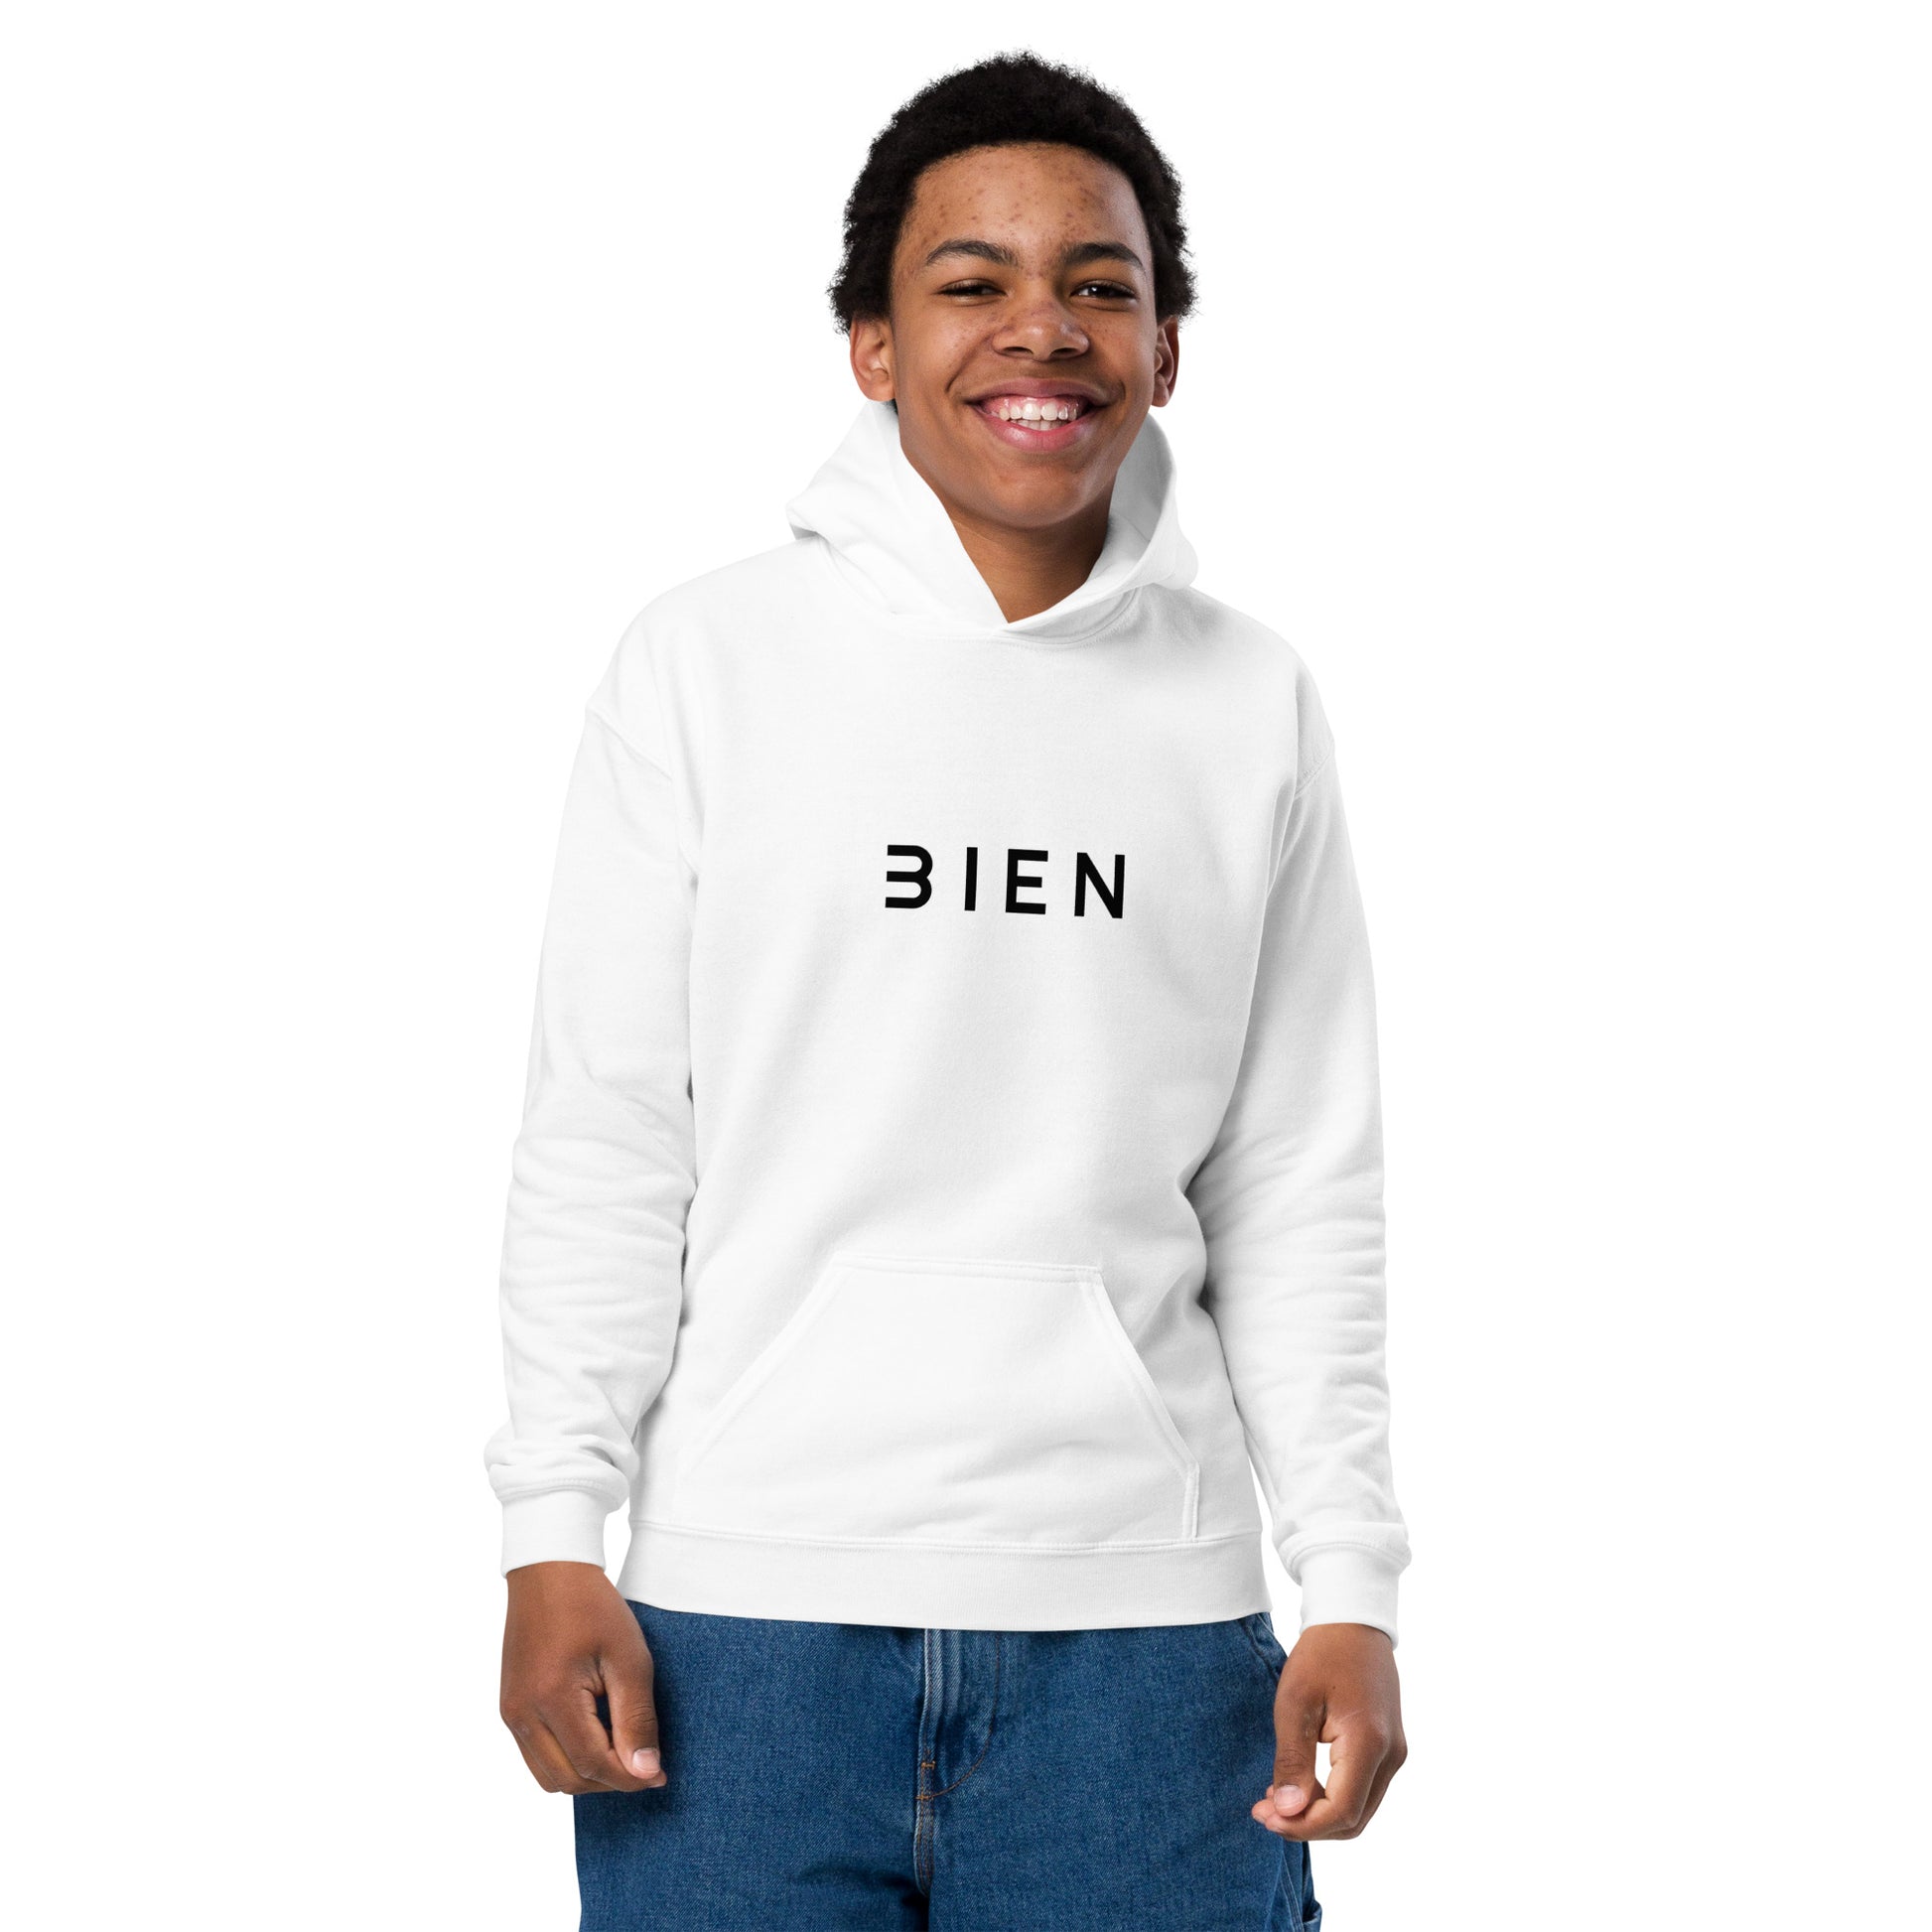 Youth hoodies for boys